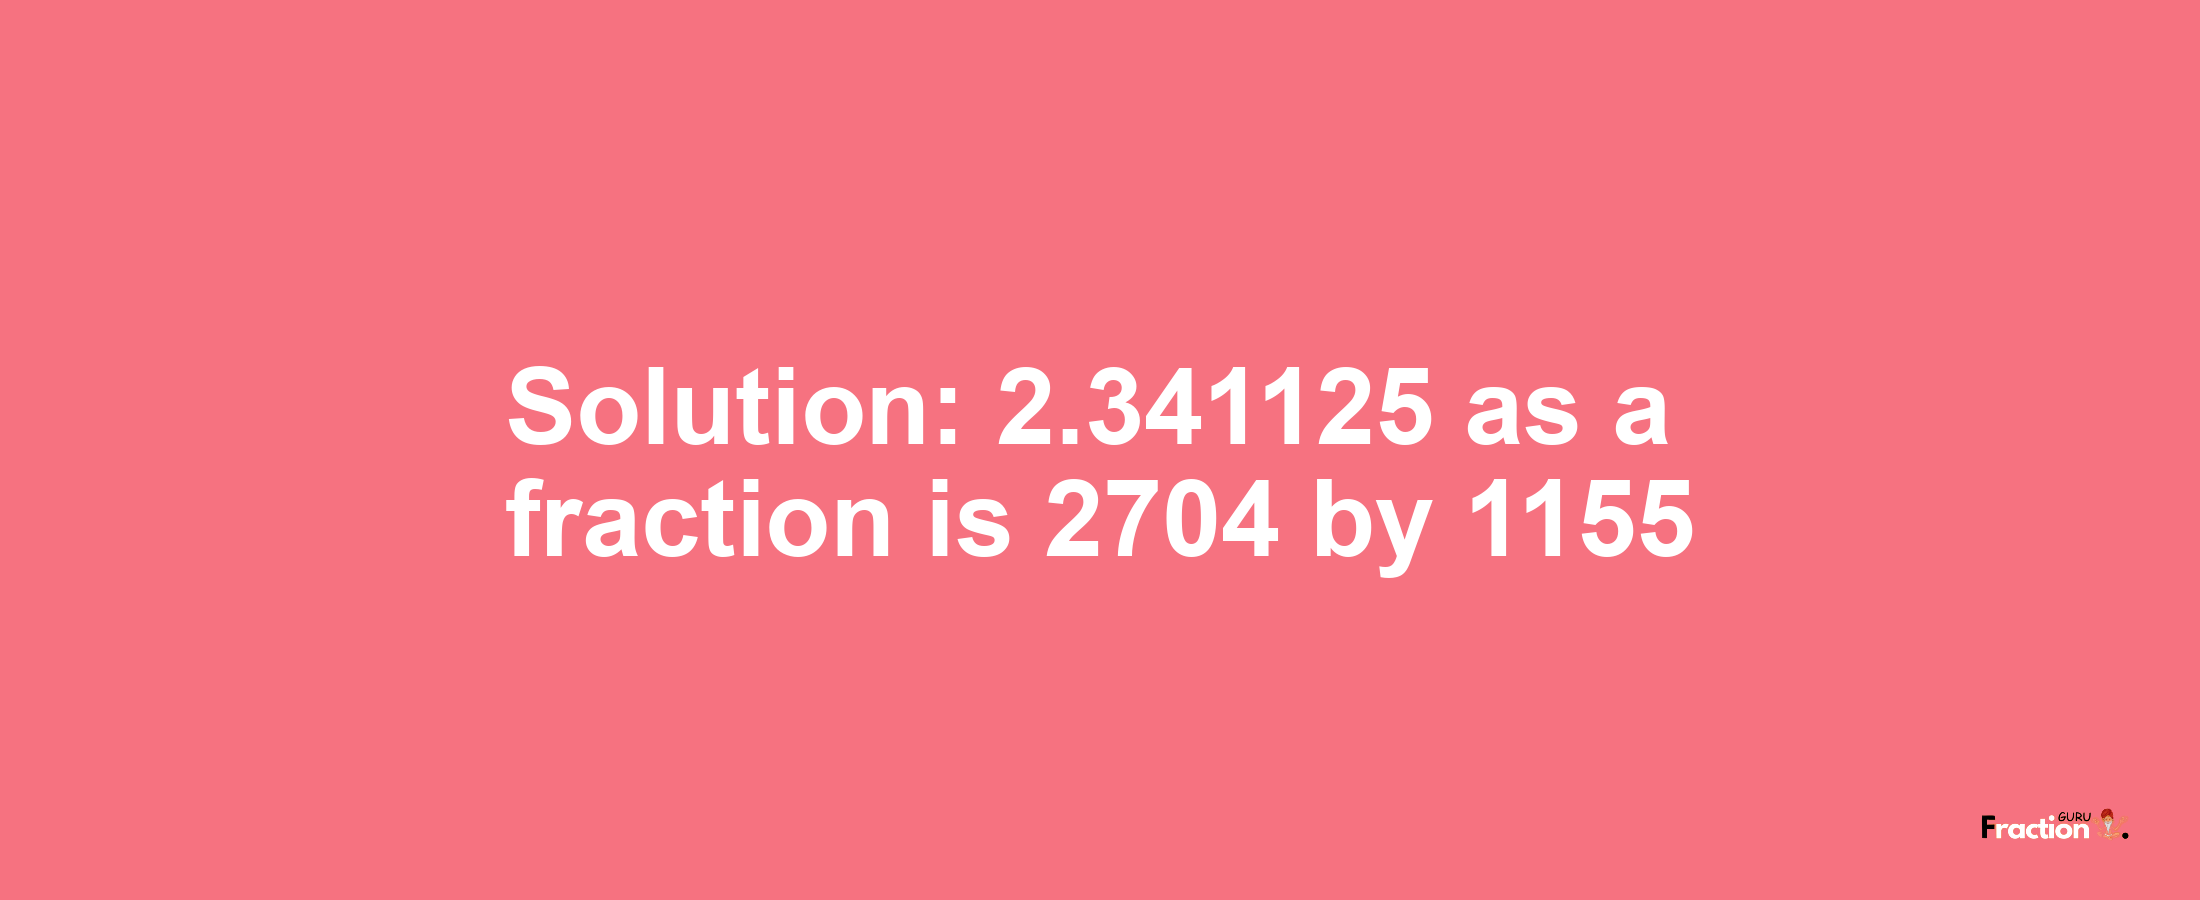 Solution:2.341125 as a fraction is 2704/1155